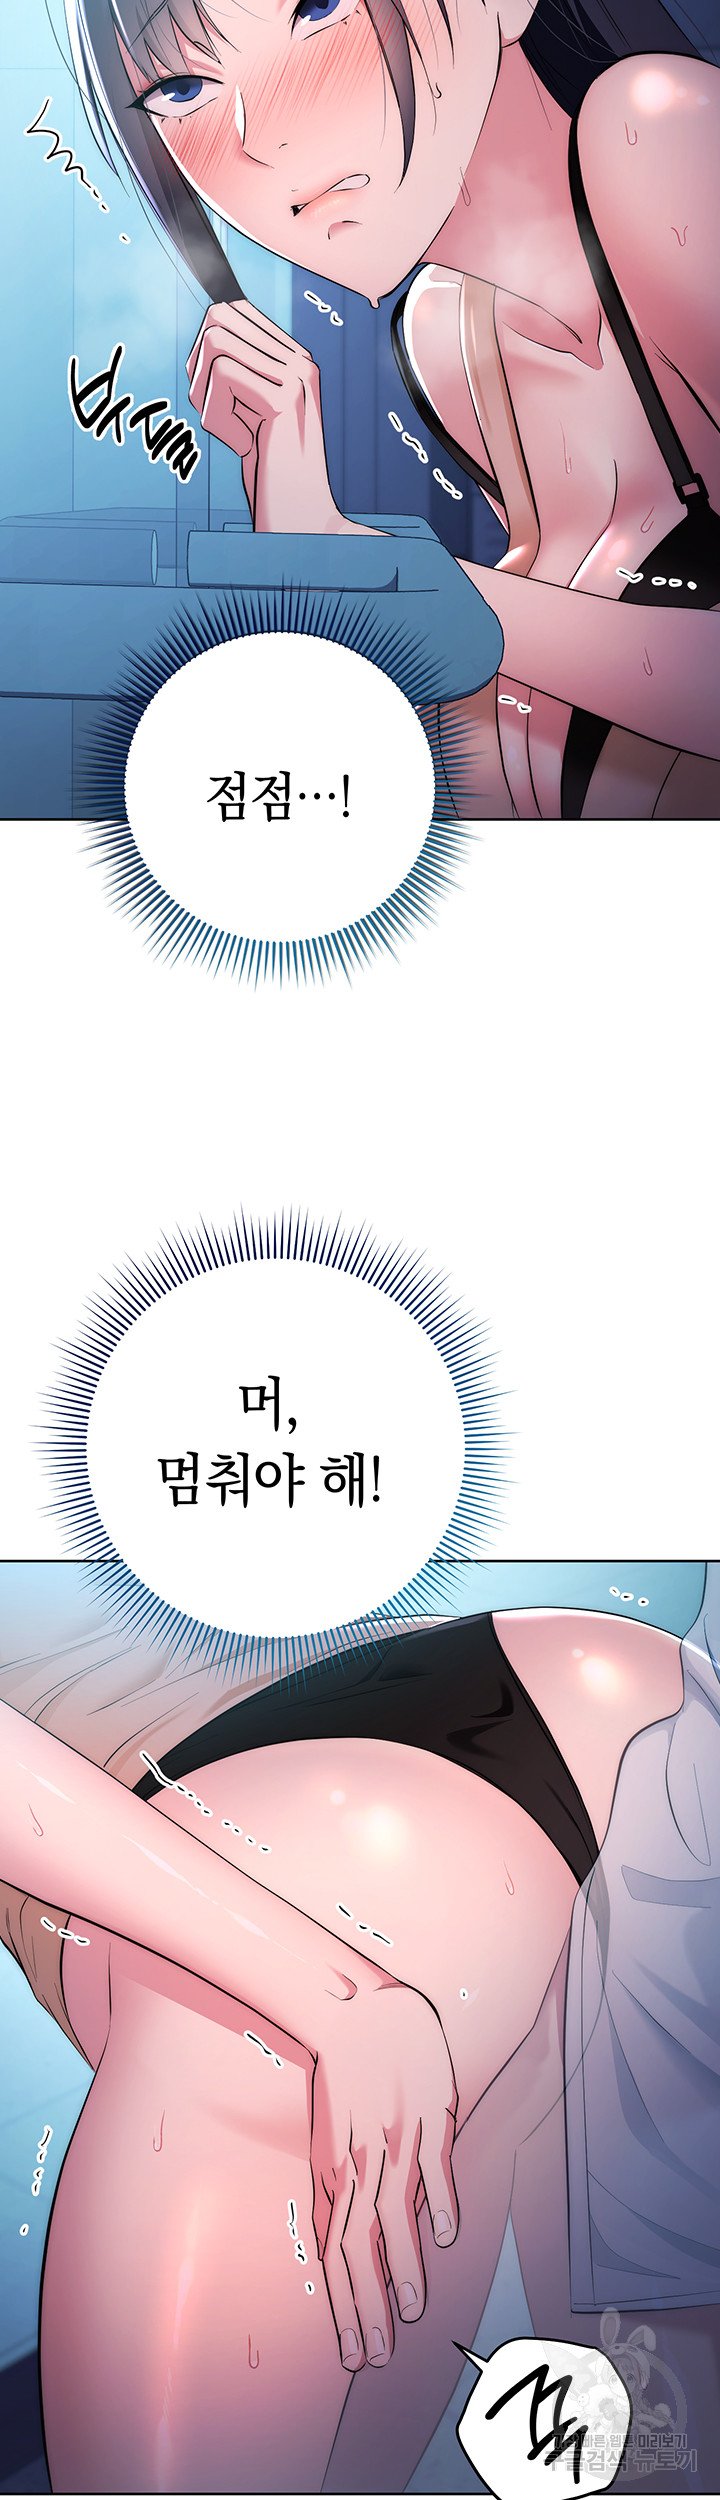 outsider-the-invisible-man-raw-chap-3-37